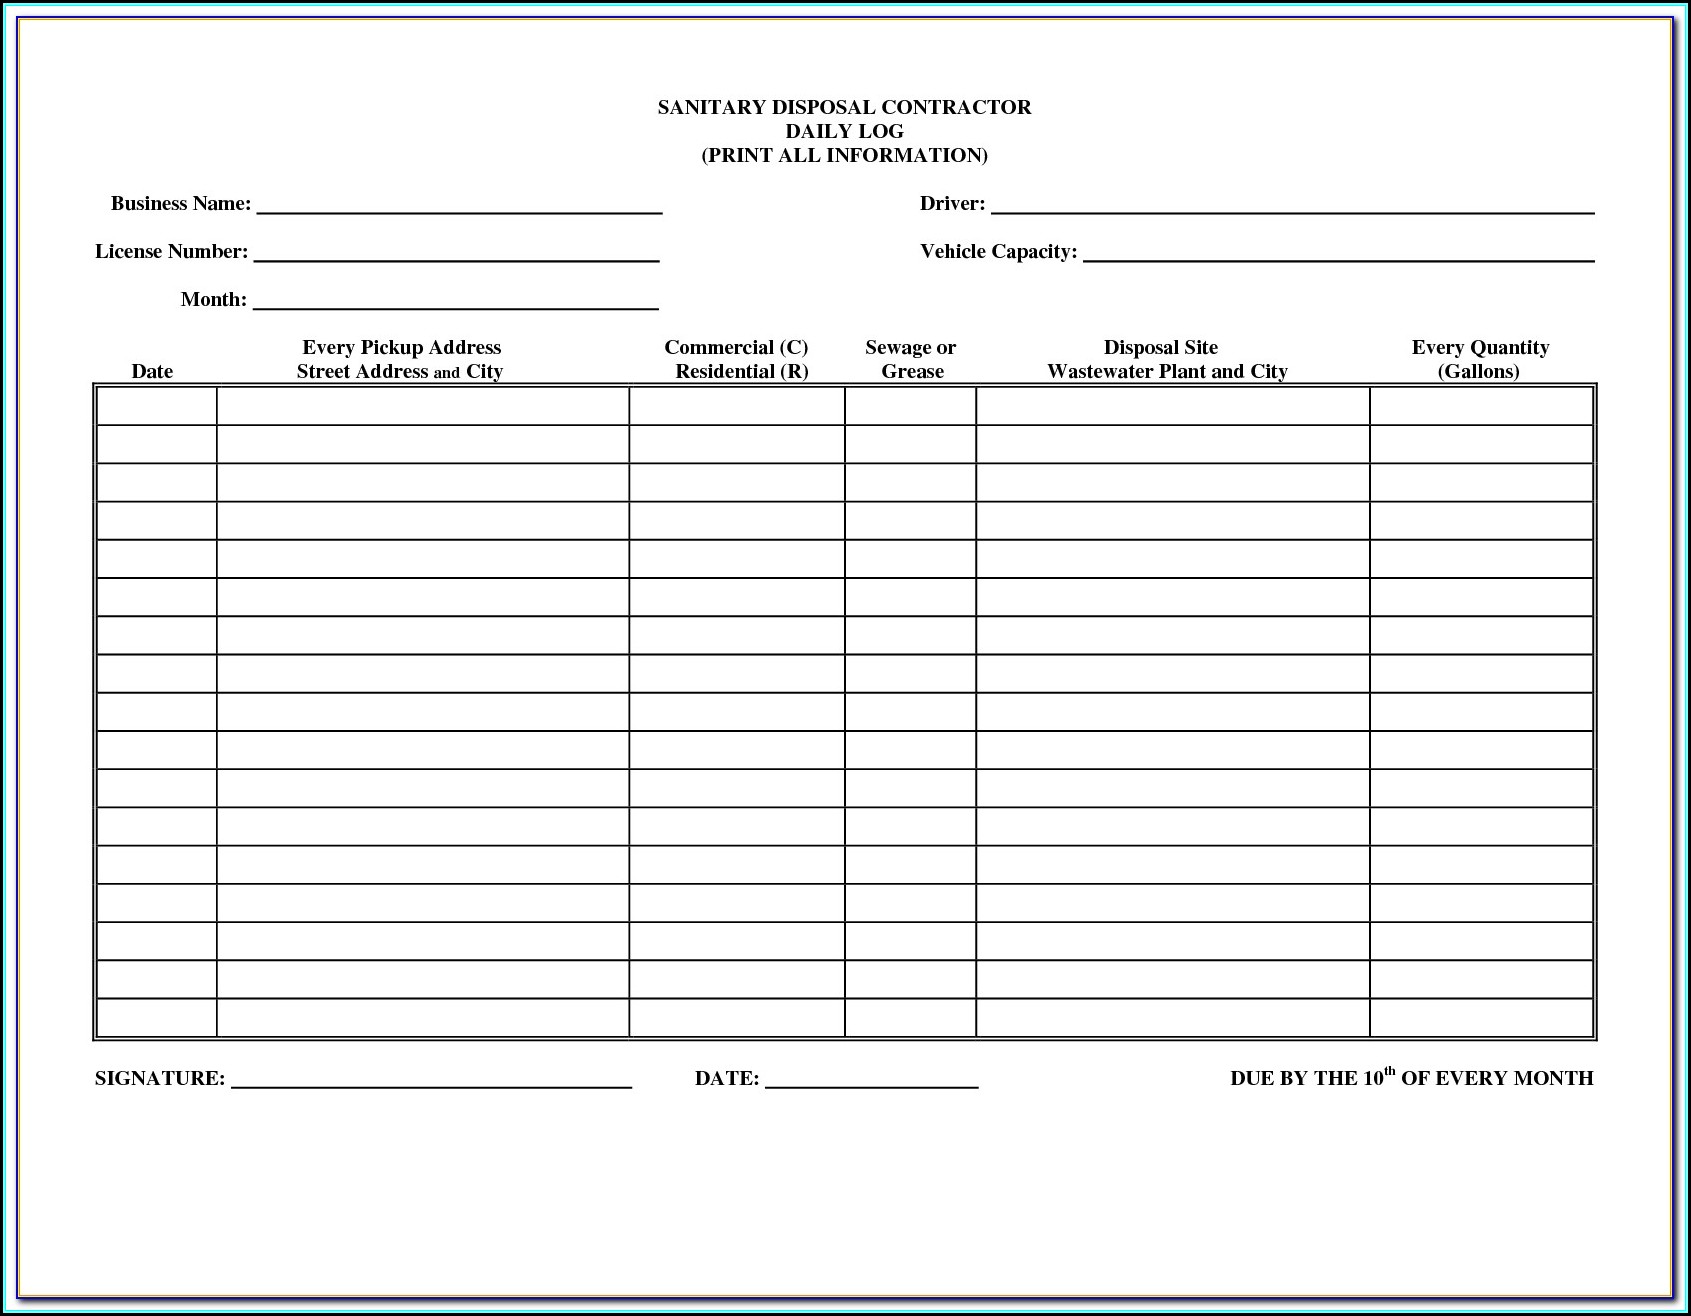 Msha Part 46 Training Forms Form Resume Examples ZL3nlOW1Q5